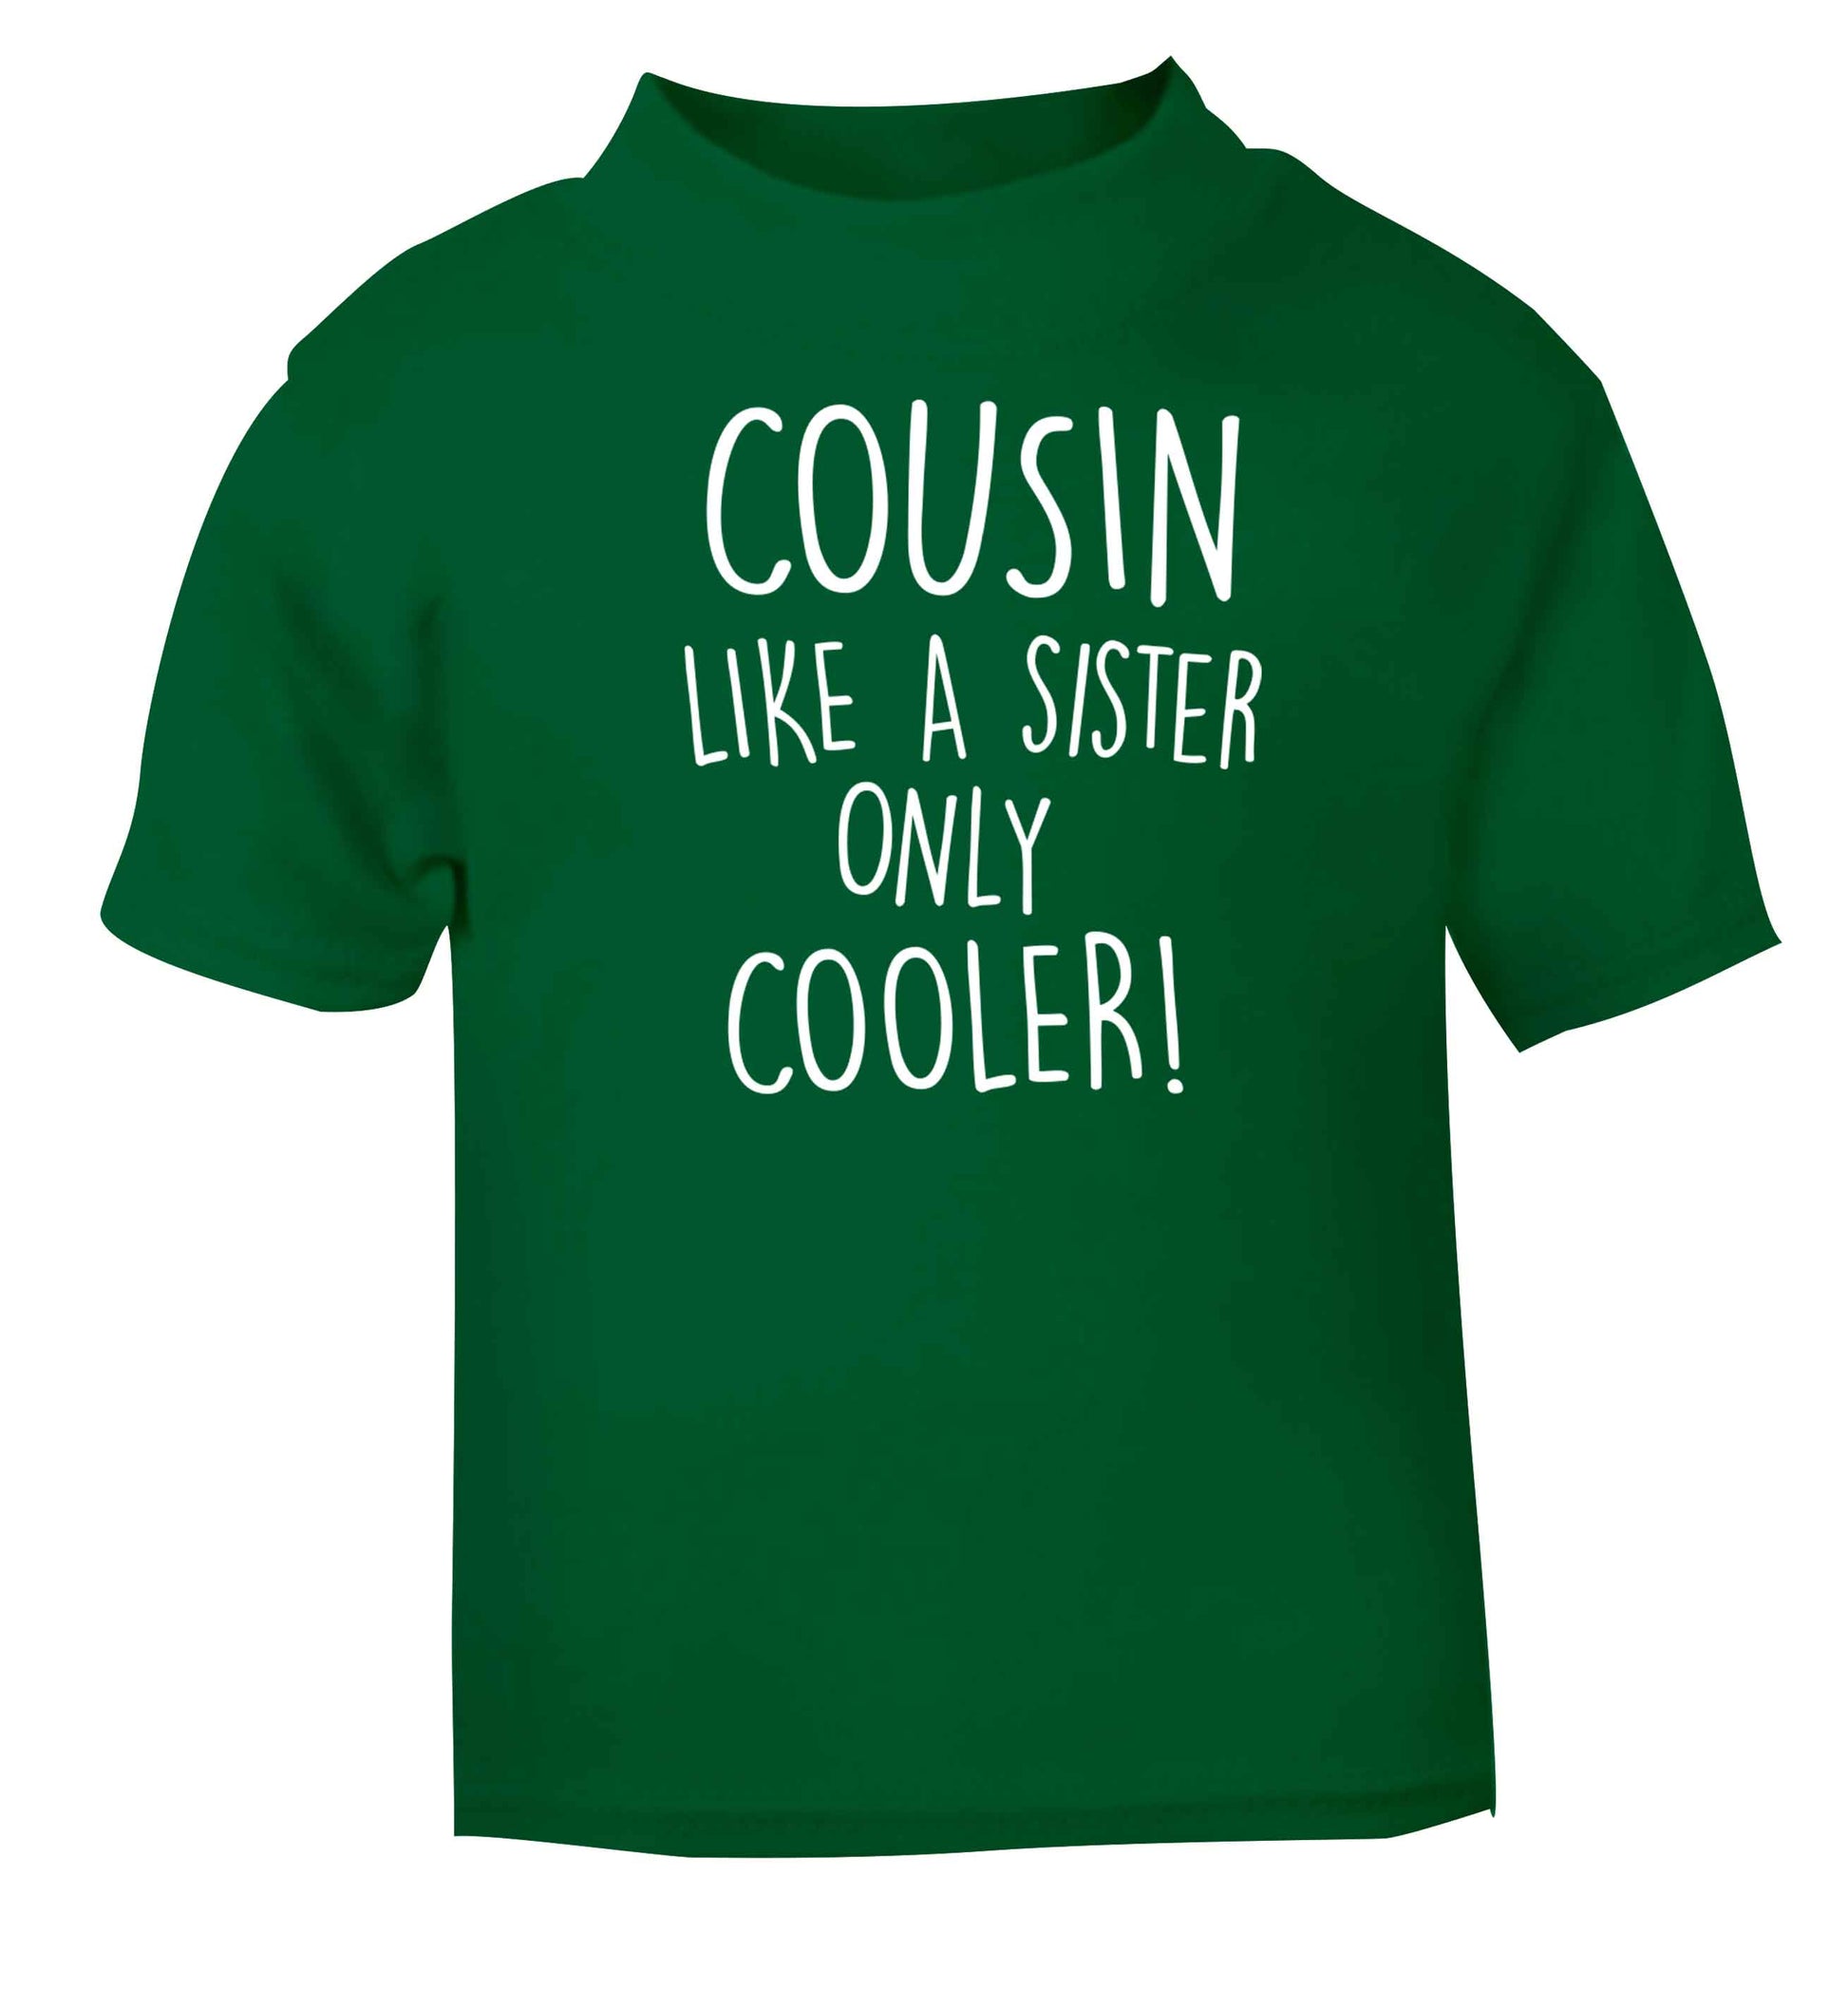 Cousin like a sister only cooler green baby toddler Tshirt 2 Years